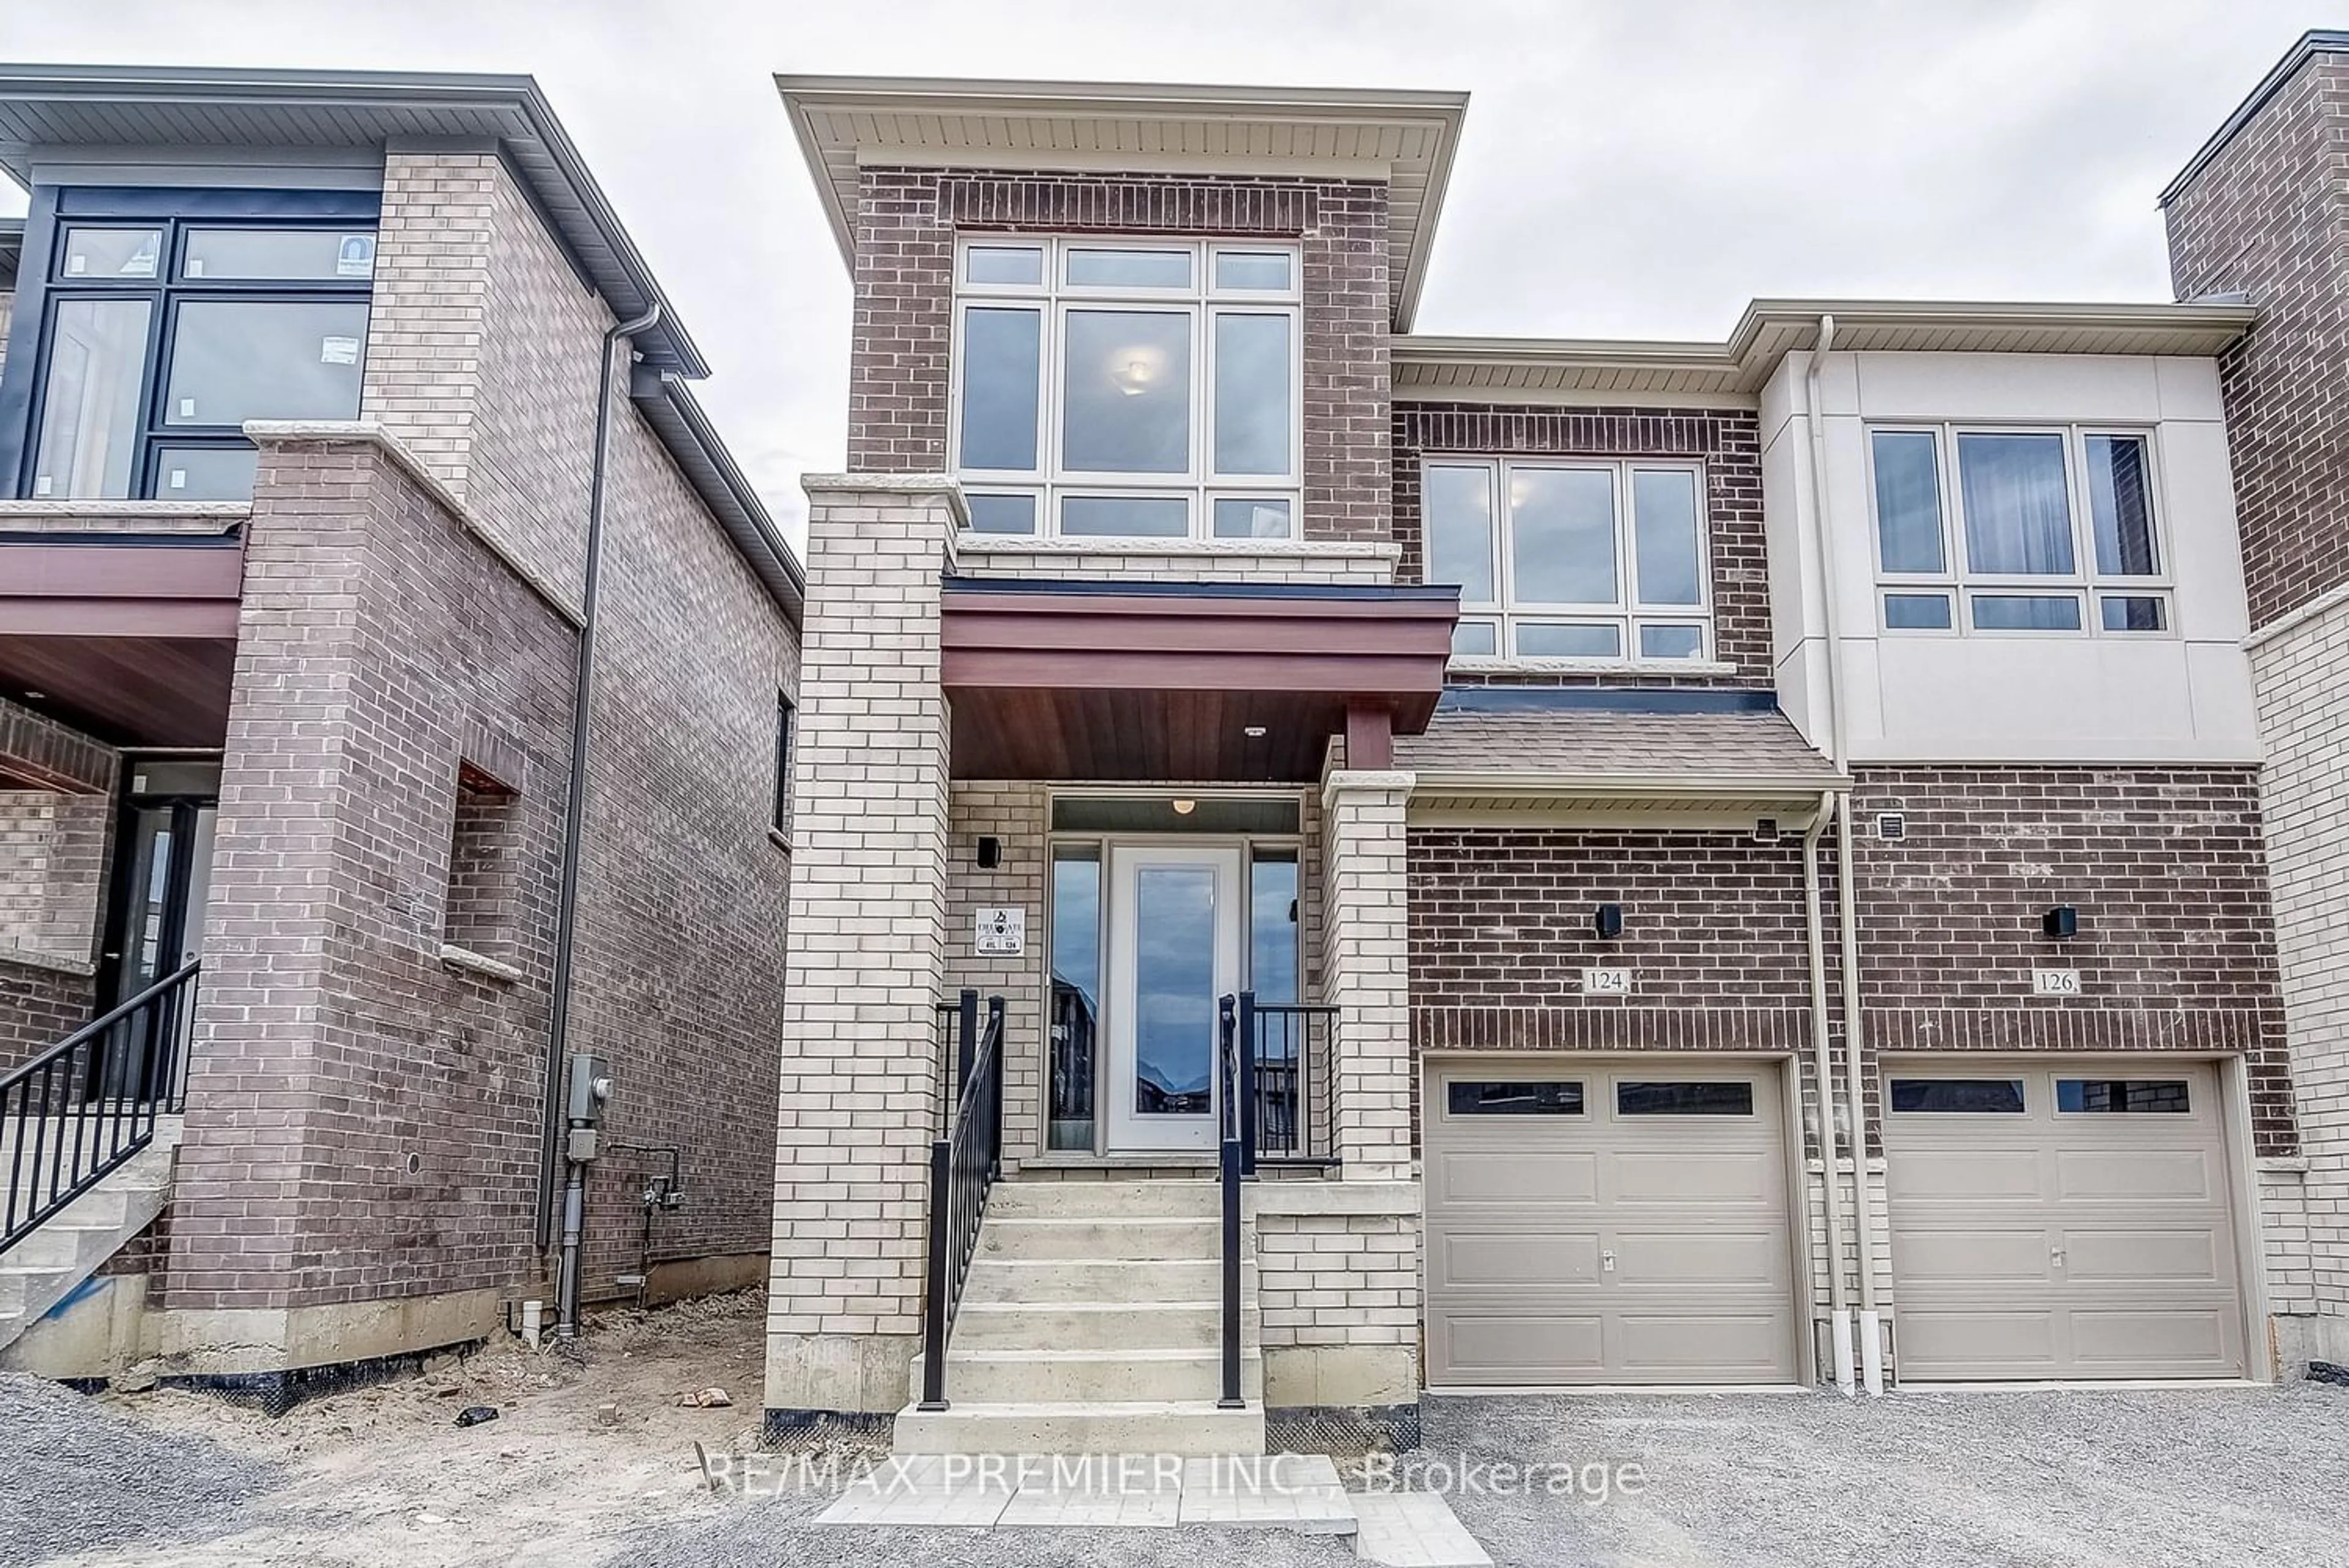 Home with brick exterior material for 124 Armilia Pl, Whitby Ontario L1P 0P7